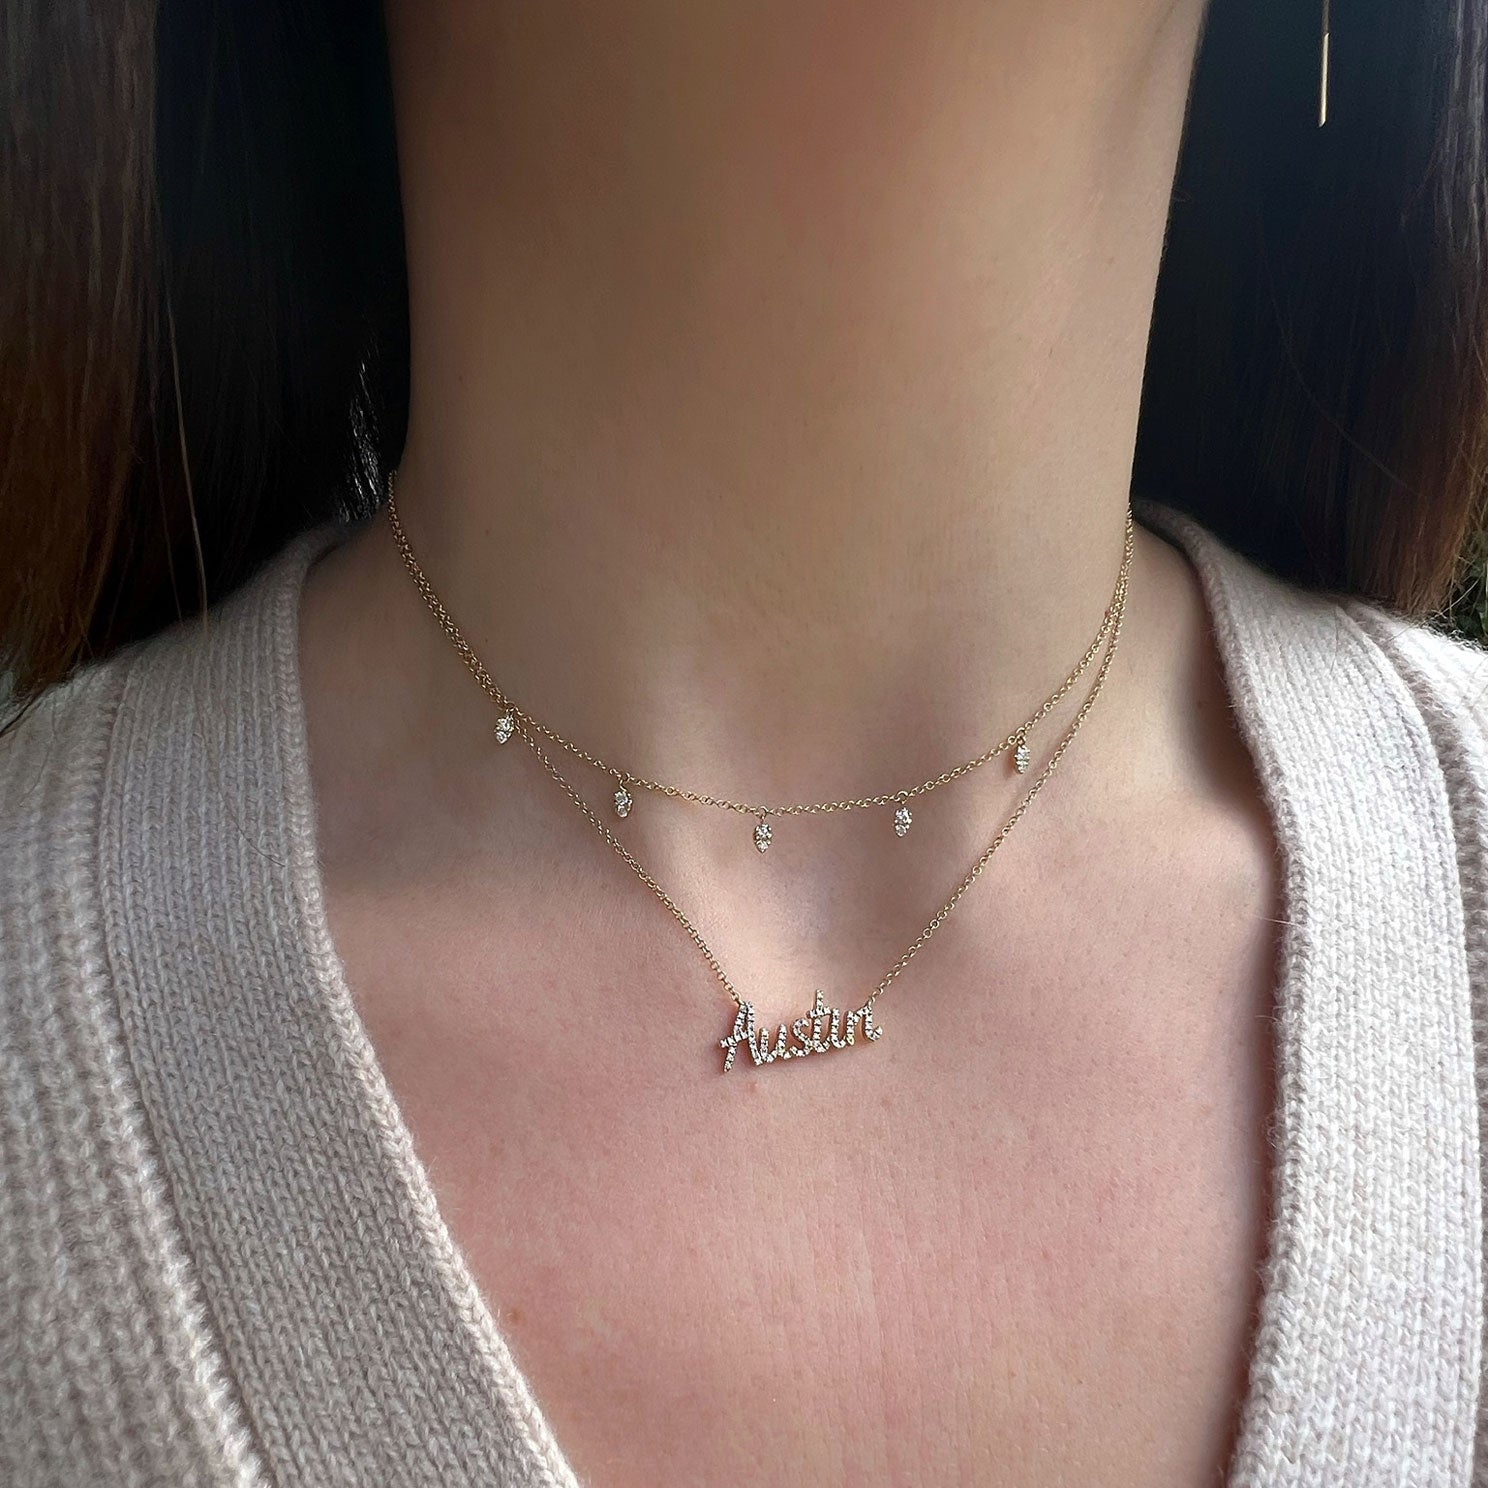 Diamond 5 Teardrop Choker Necklace in 14k yellow gold styled on neck of model with diamond script necklace with initials AUSTIN